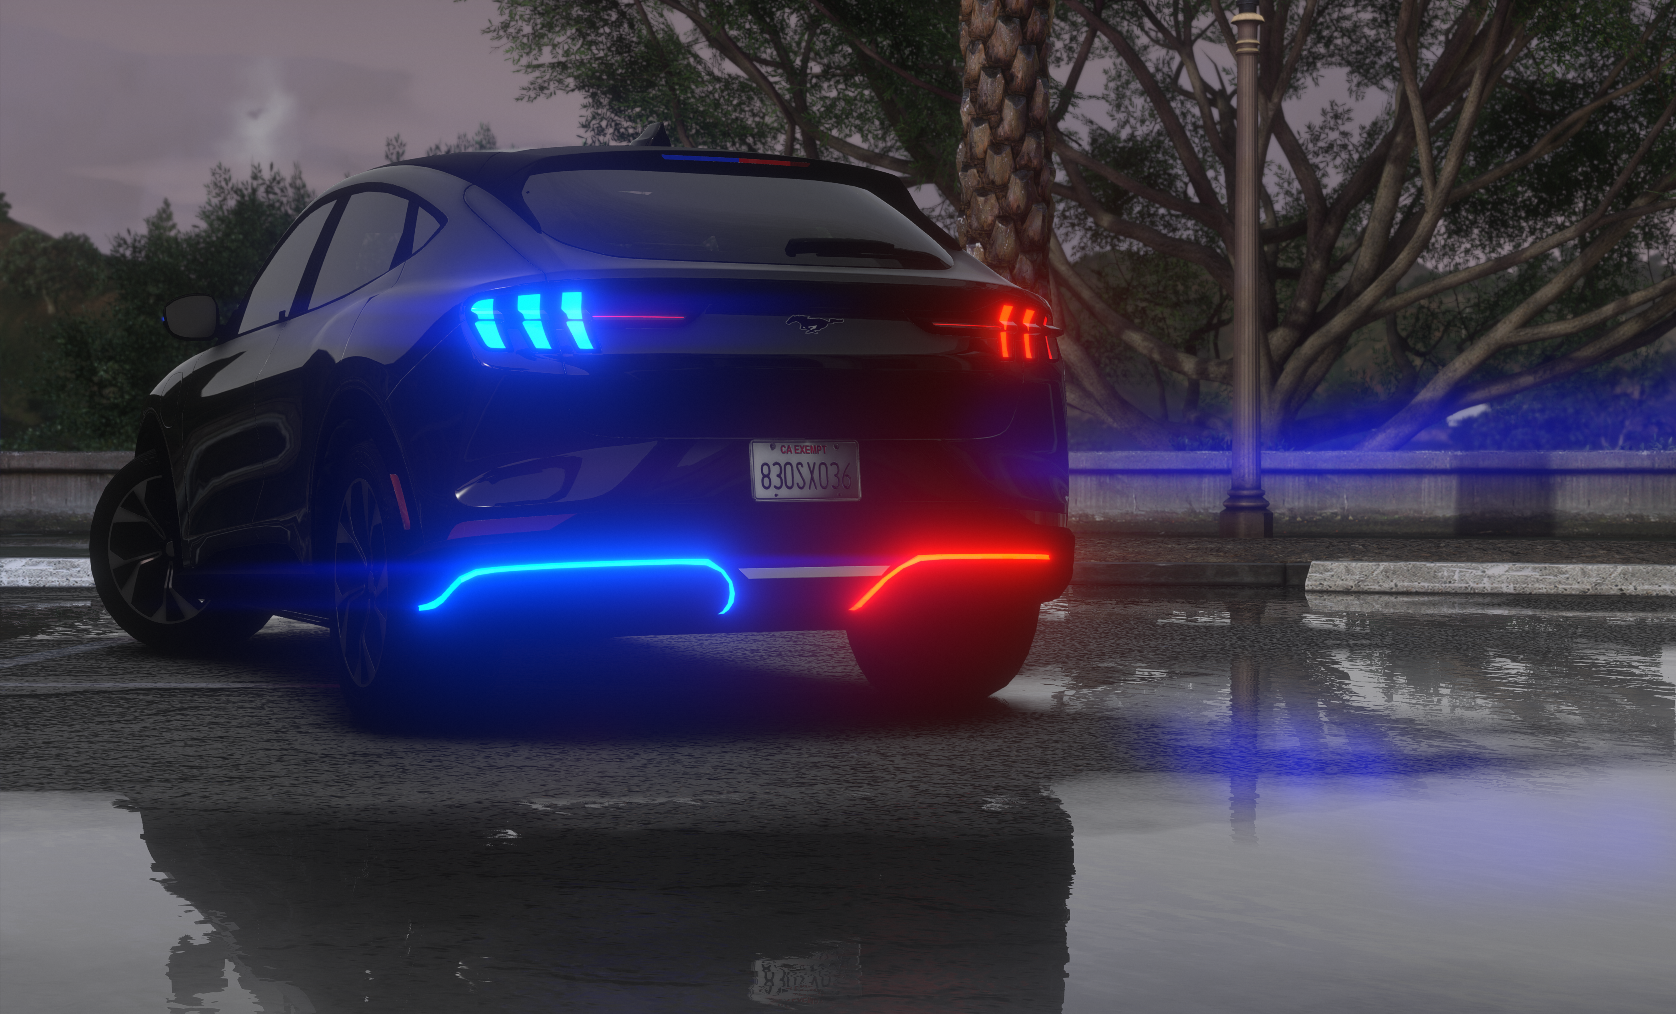 2021 Ford Mustang Mach-E FiveM Police Vehicle